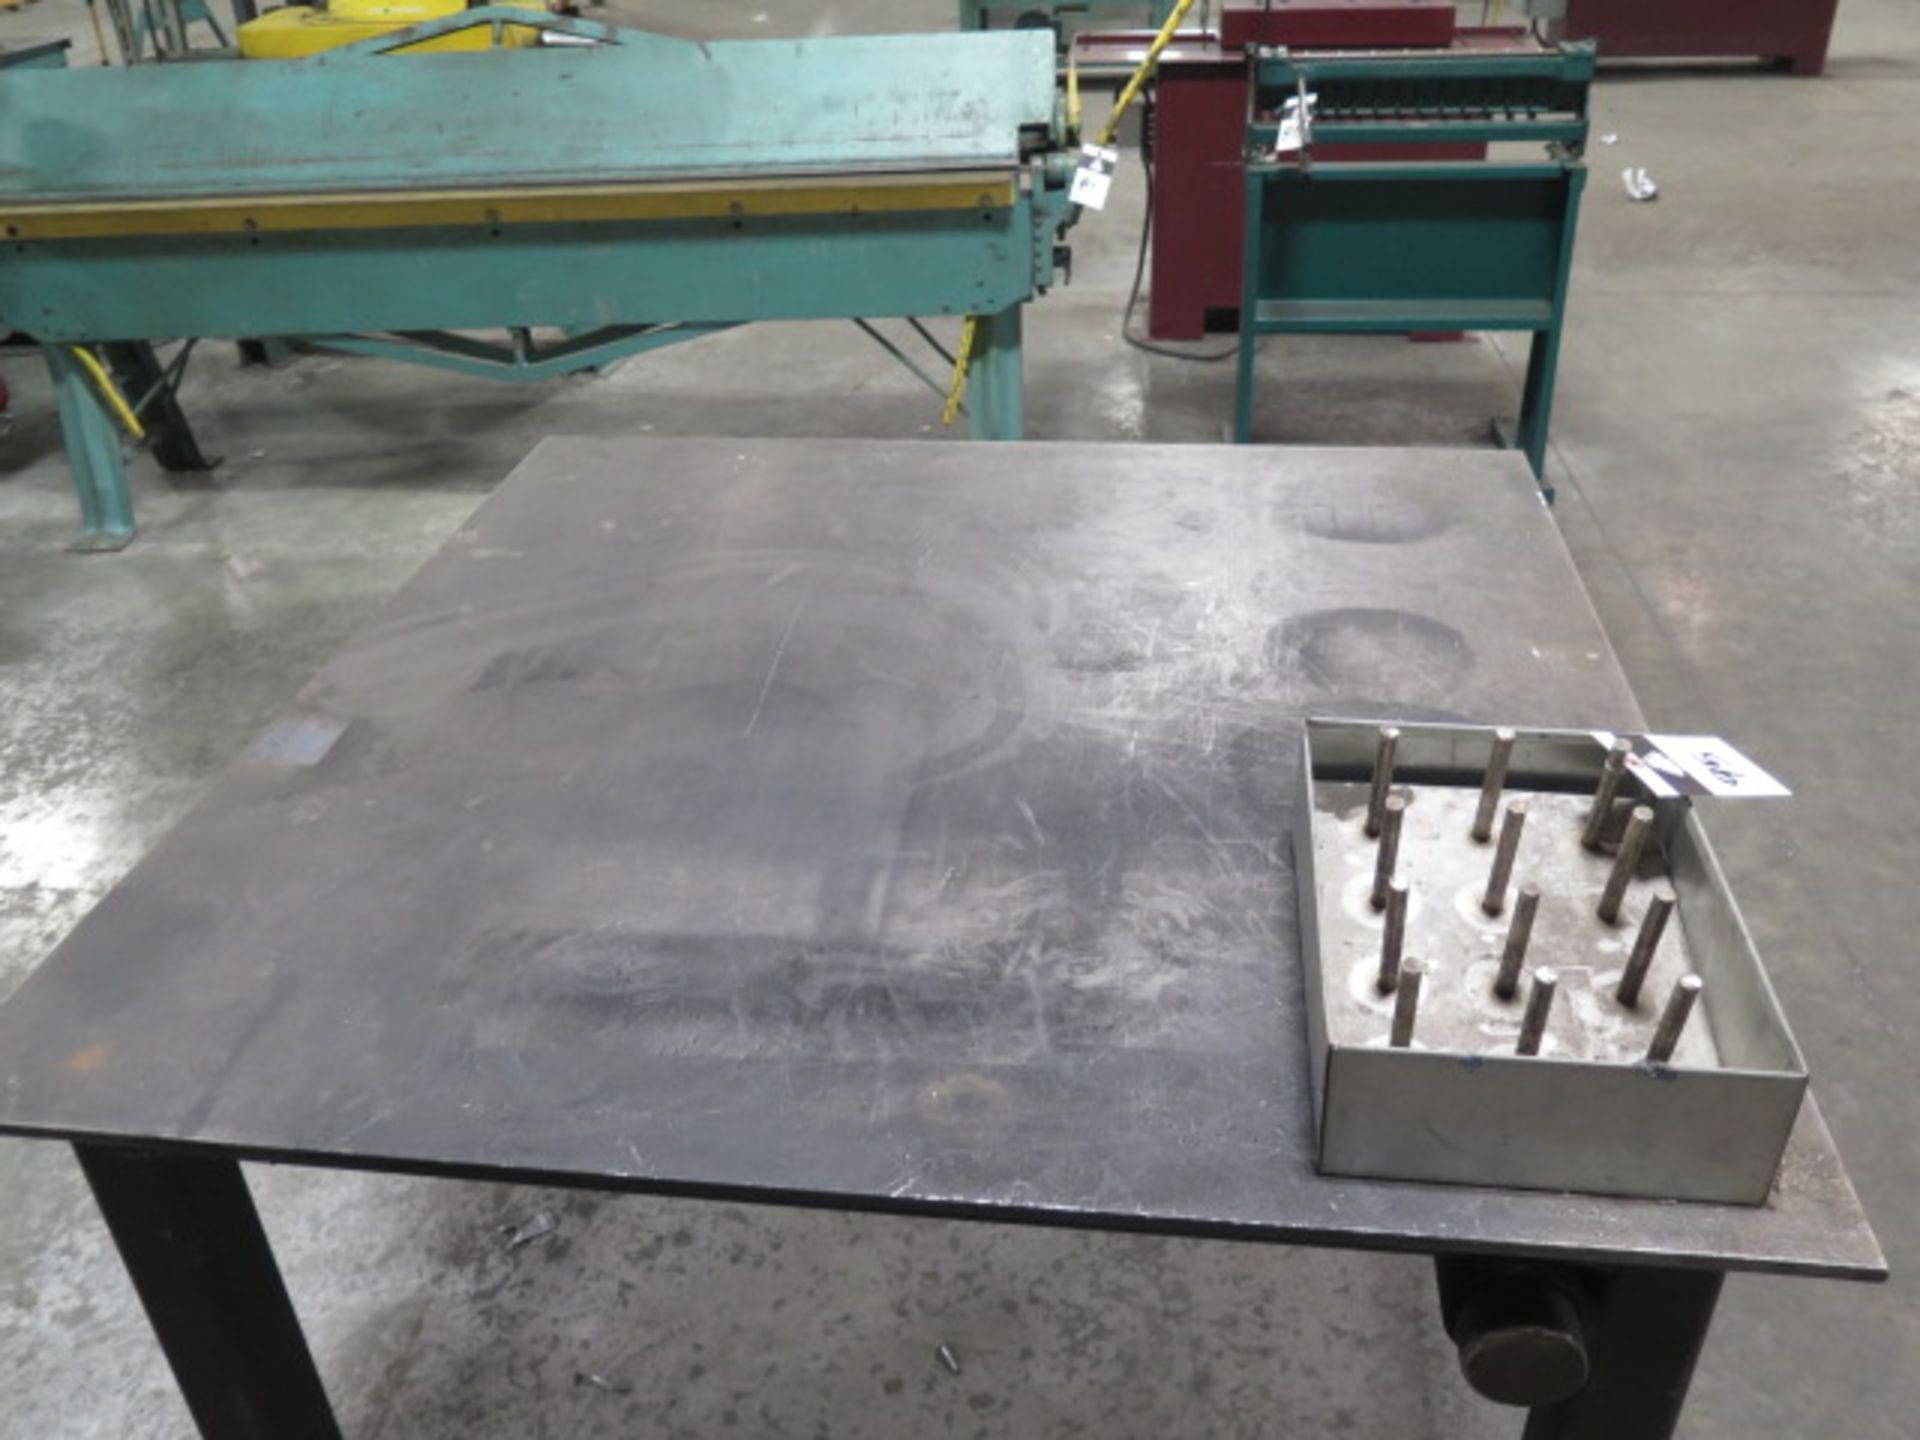 48" x 48" Steel Table w/ 3" Forming Bar (SOLD AS-IS - NO WARRANTY) - Image 2 of 3